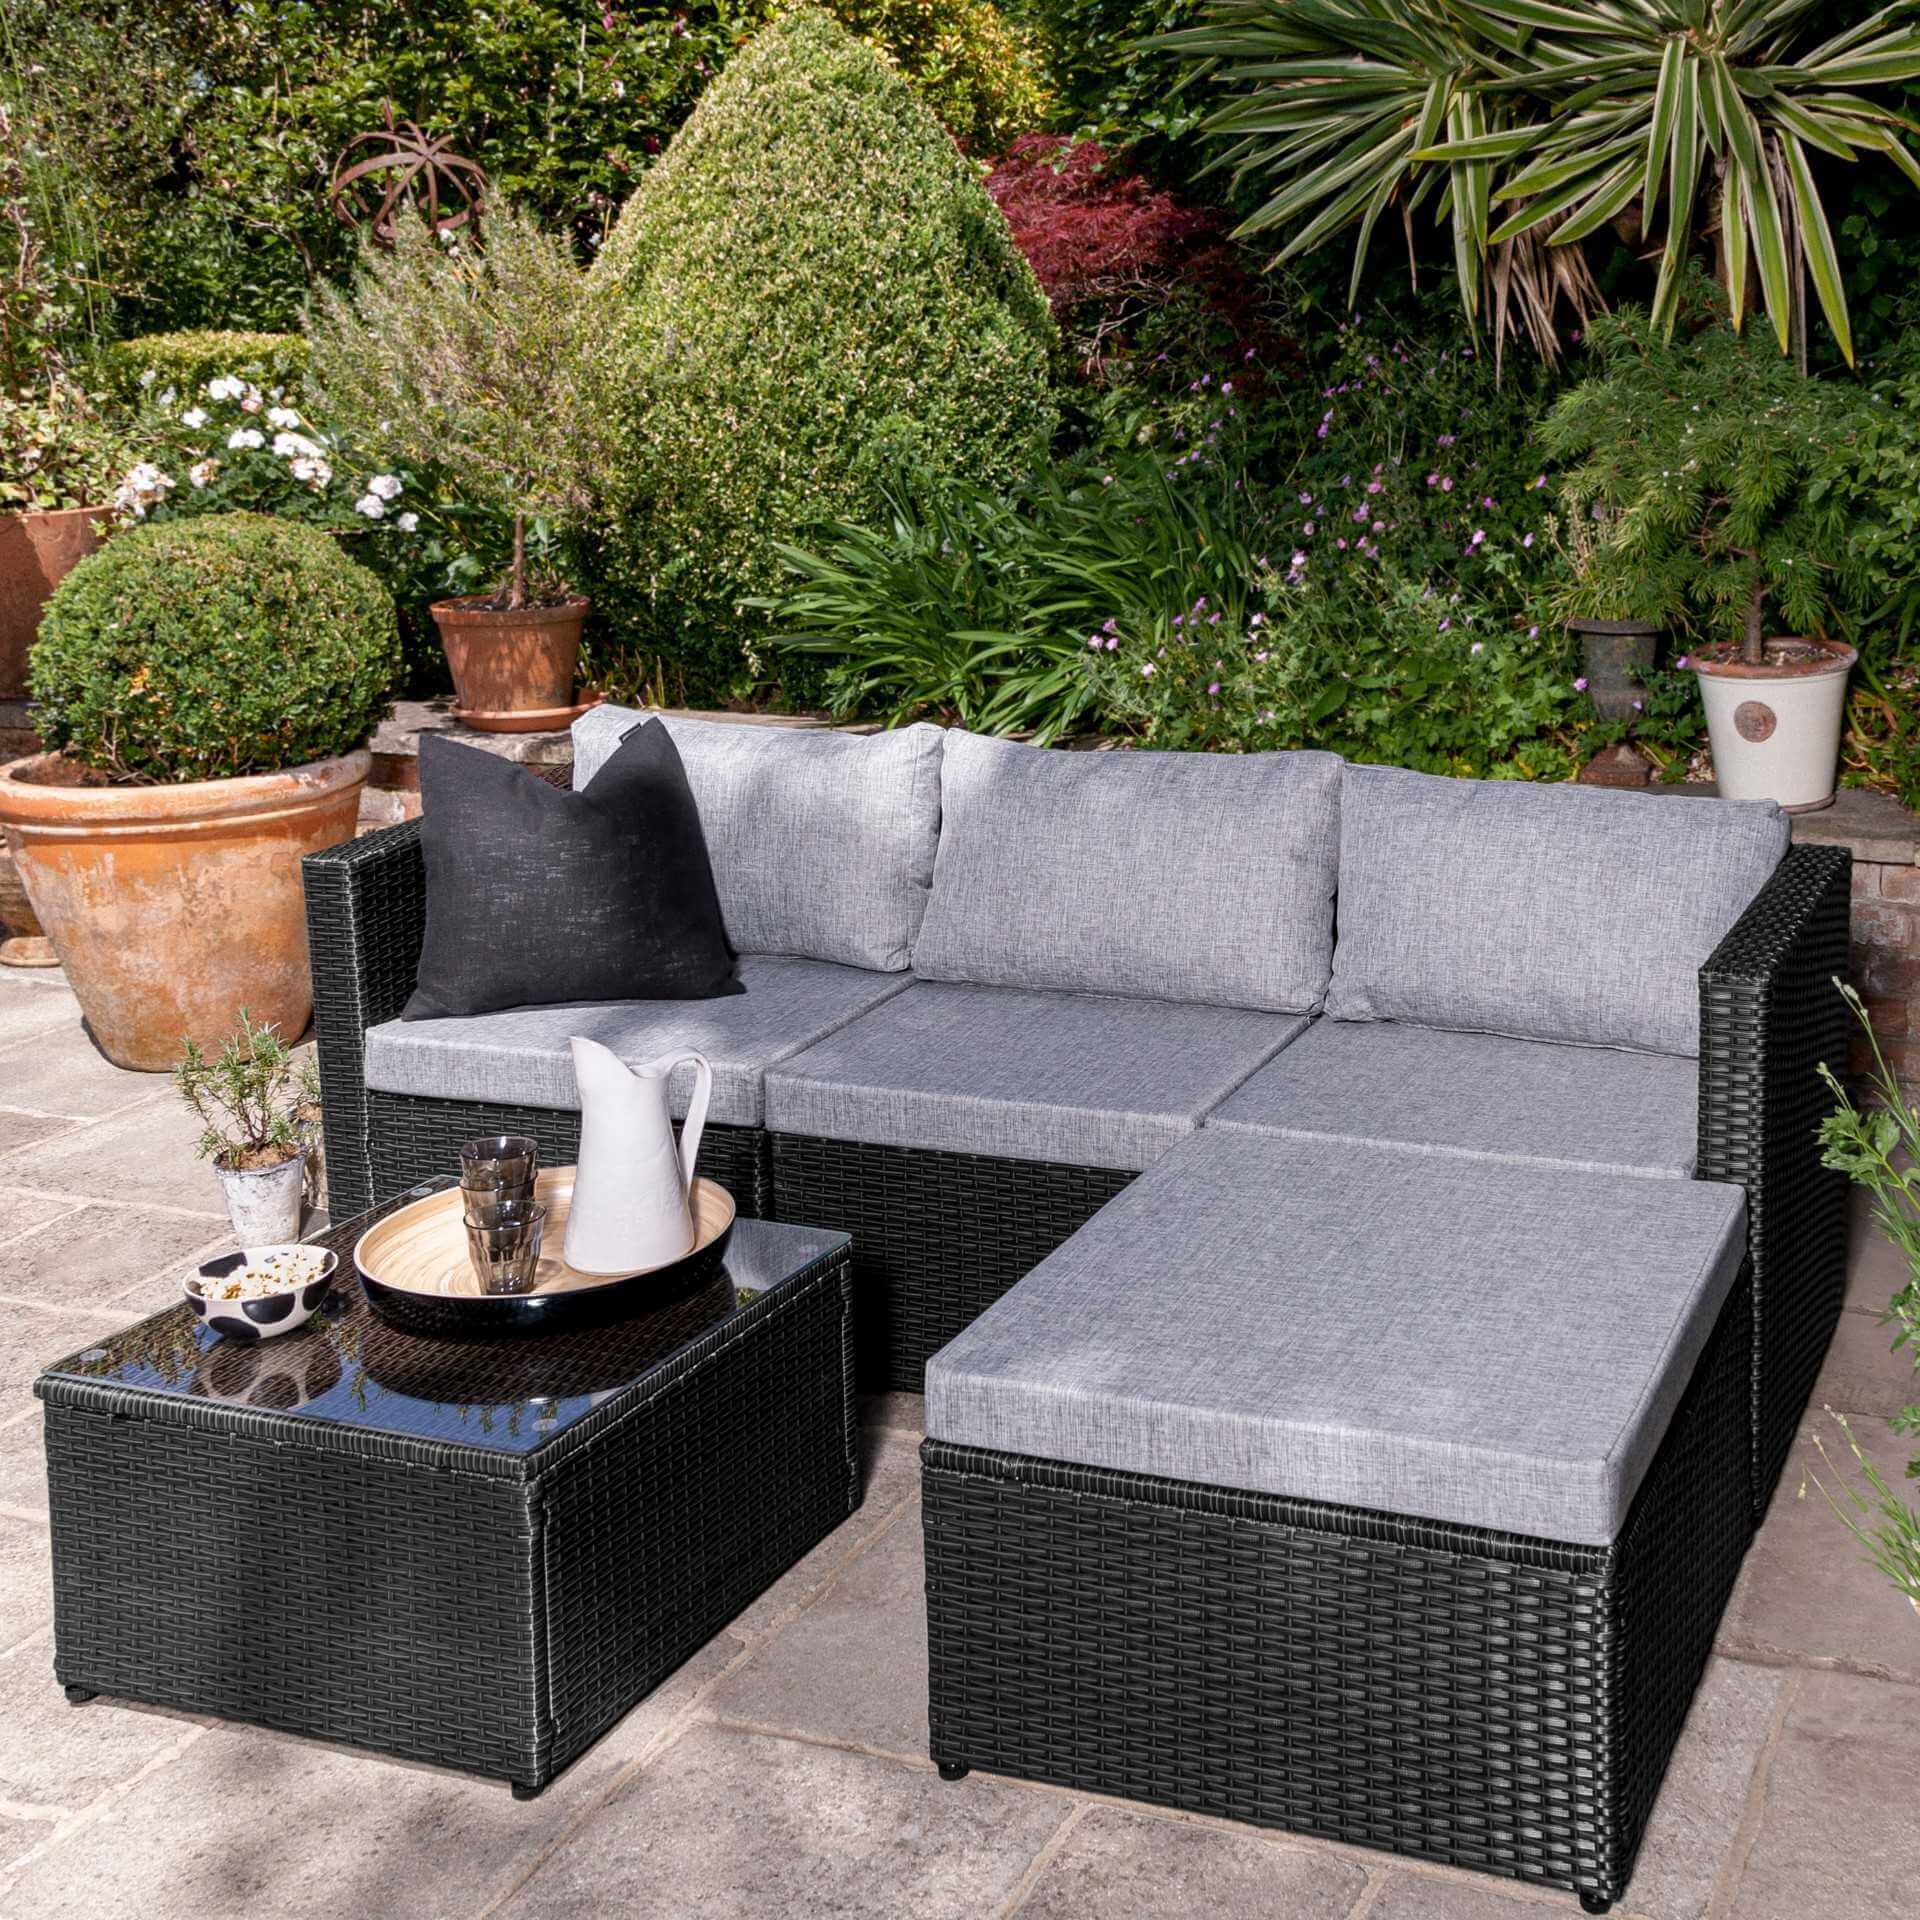 4 Seater Rattan Corner Sofa Set with Lean Over Parasol and Base - Black Weave - Laura James